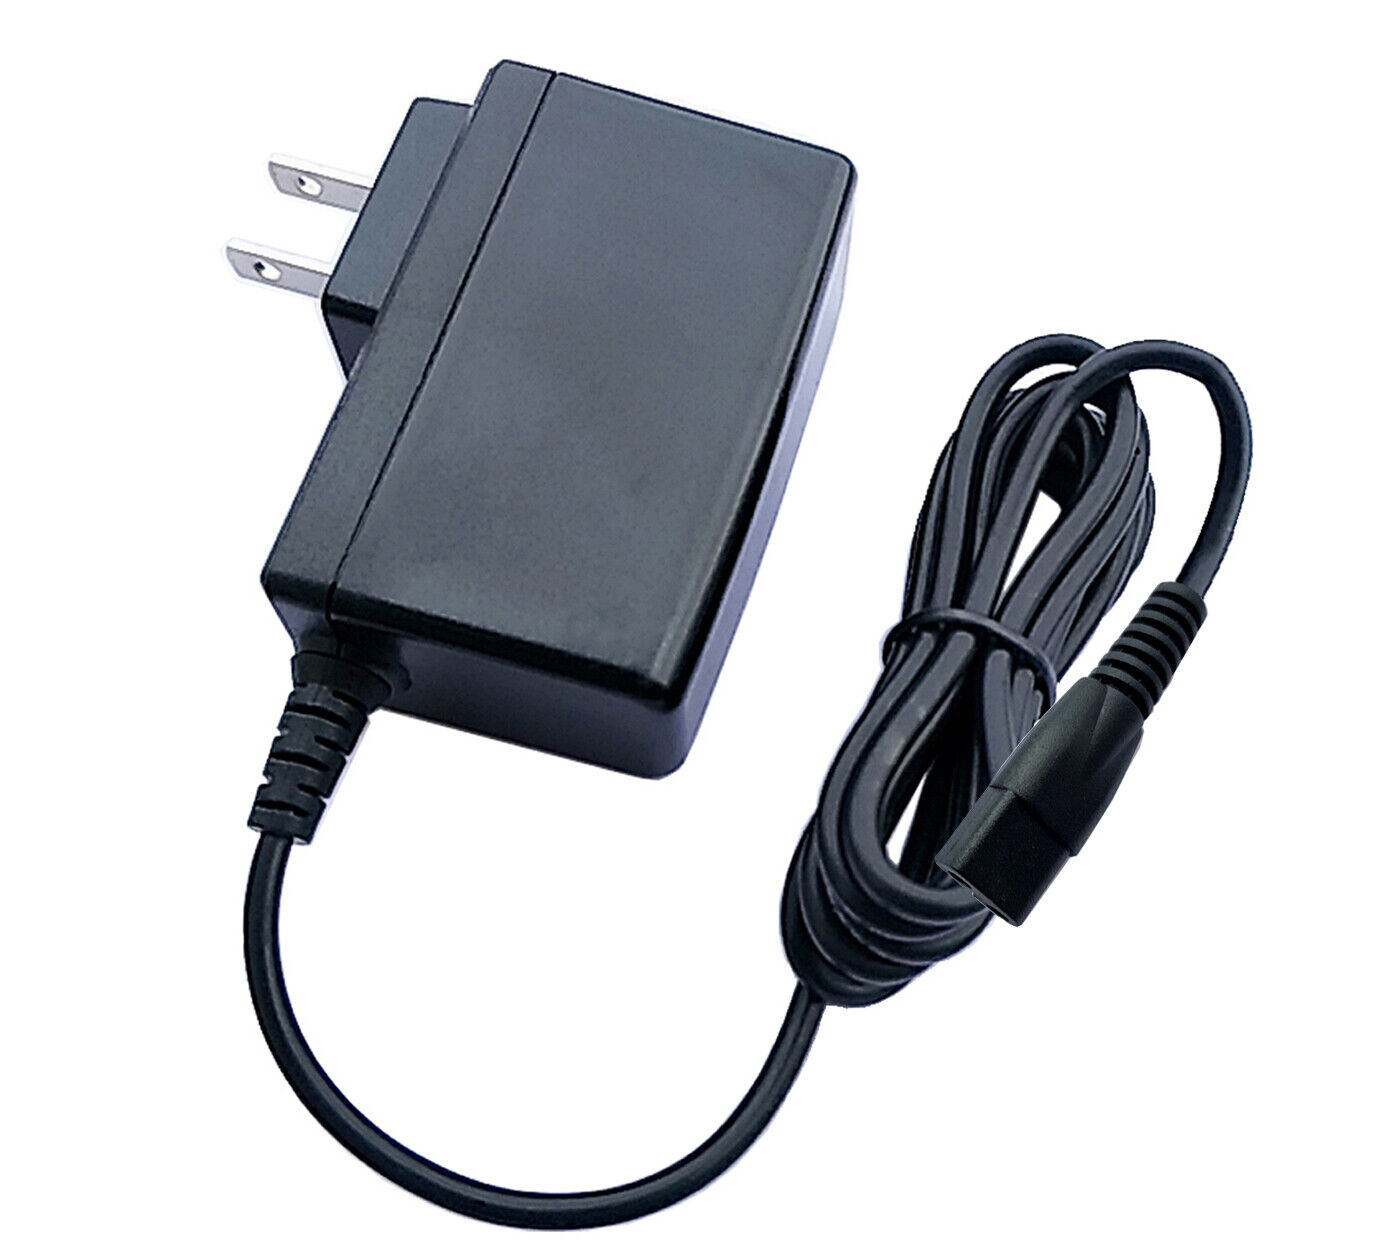 AC Adapter For Wybot Osprey 700 WY3312 WY004 Cordless Robotic Pool Floor Cleaner Compatible Brand For Wybot Type AC/DC